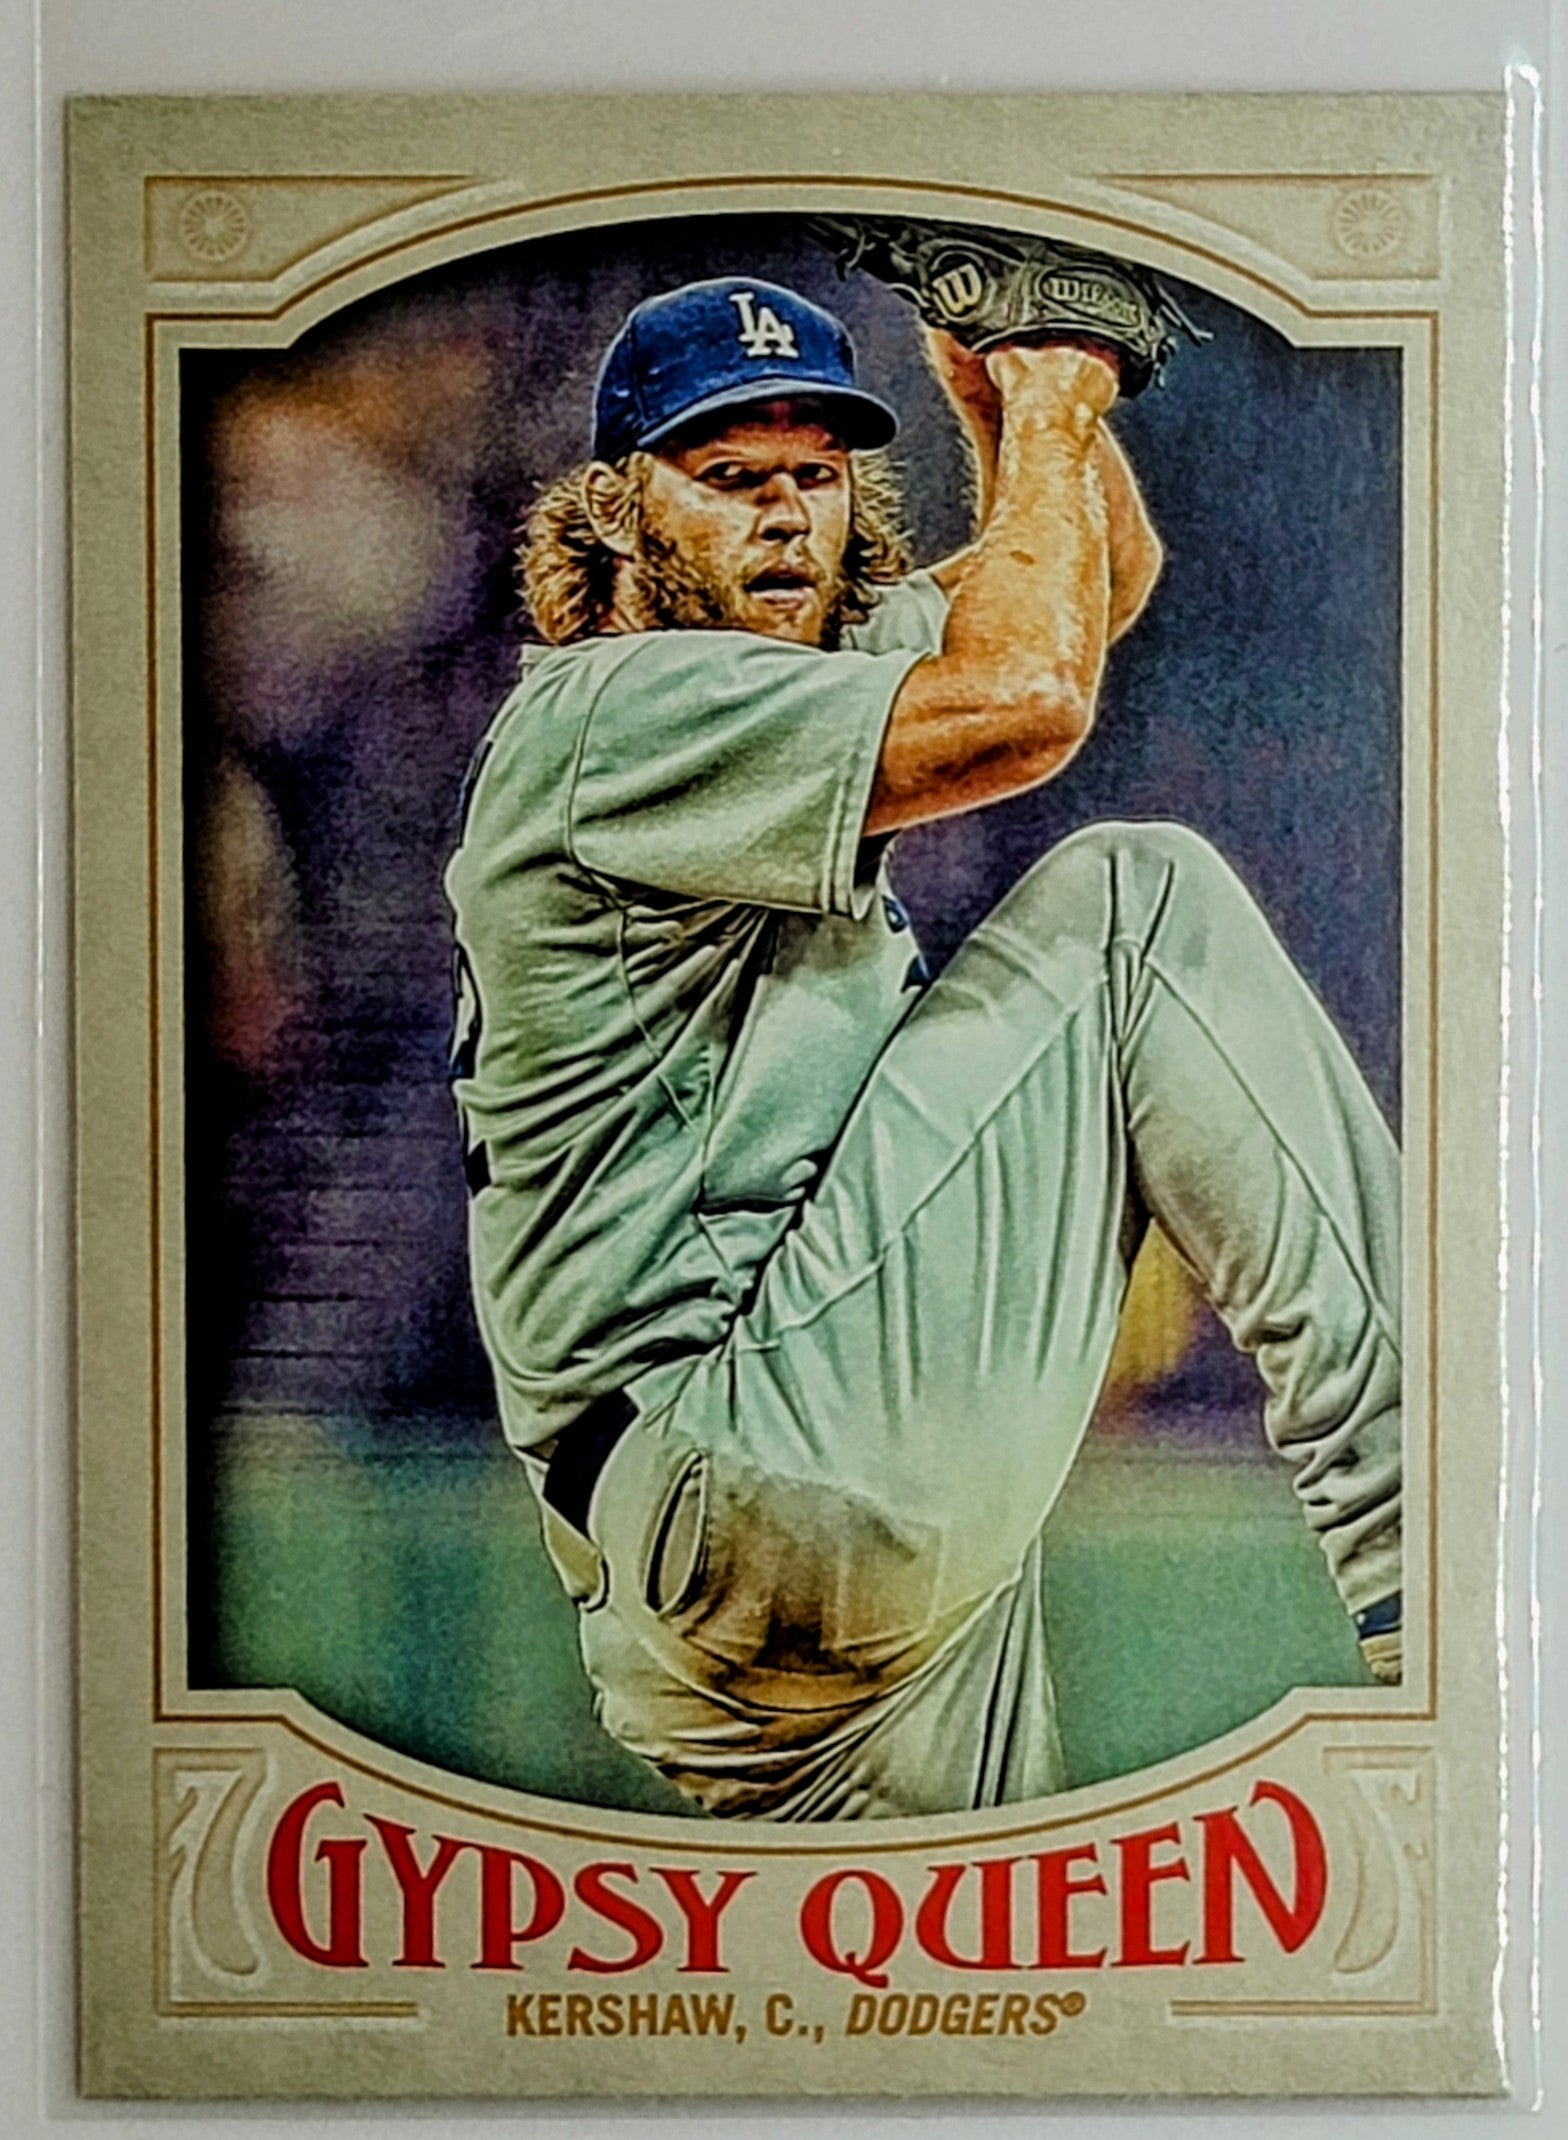 2016 Topps Gypsy Queen Clayton
  Kershaw   Los Angeles Dodgers Baseball
  Card TH1C4 simple Xclusive Collectibles   